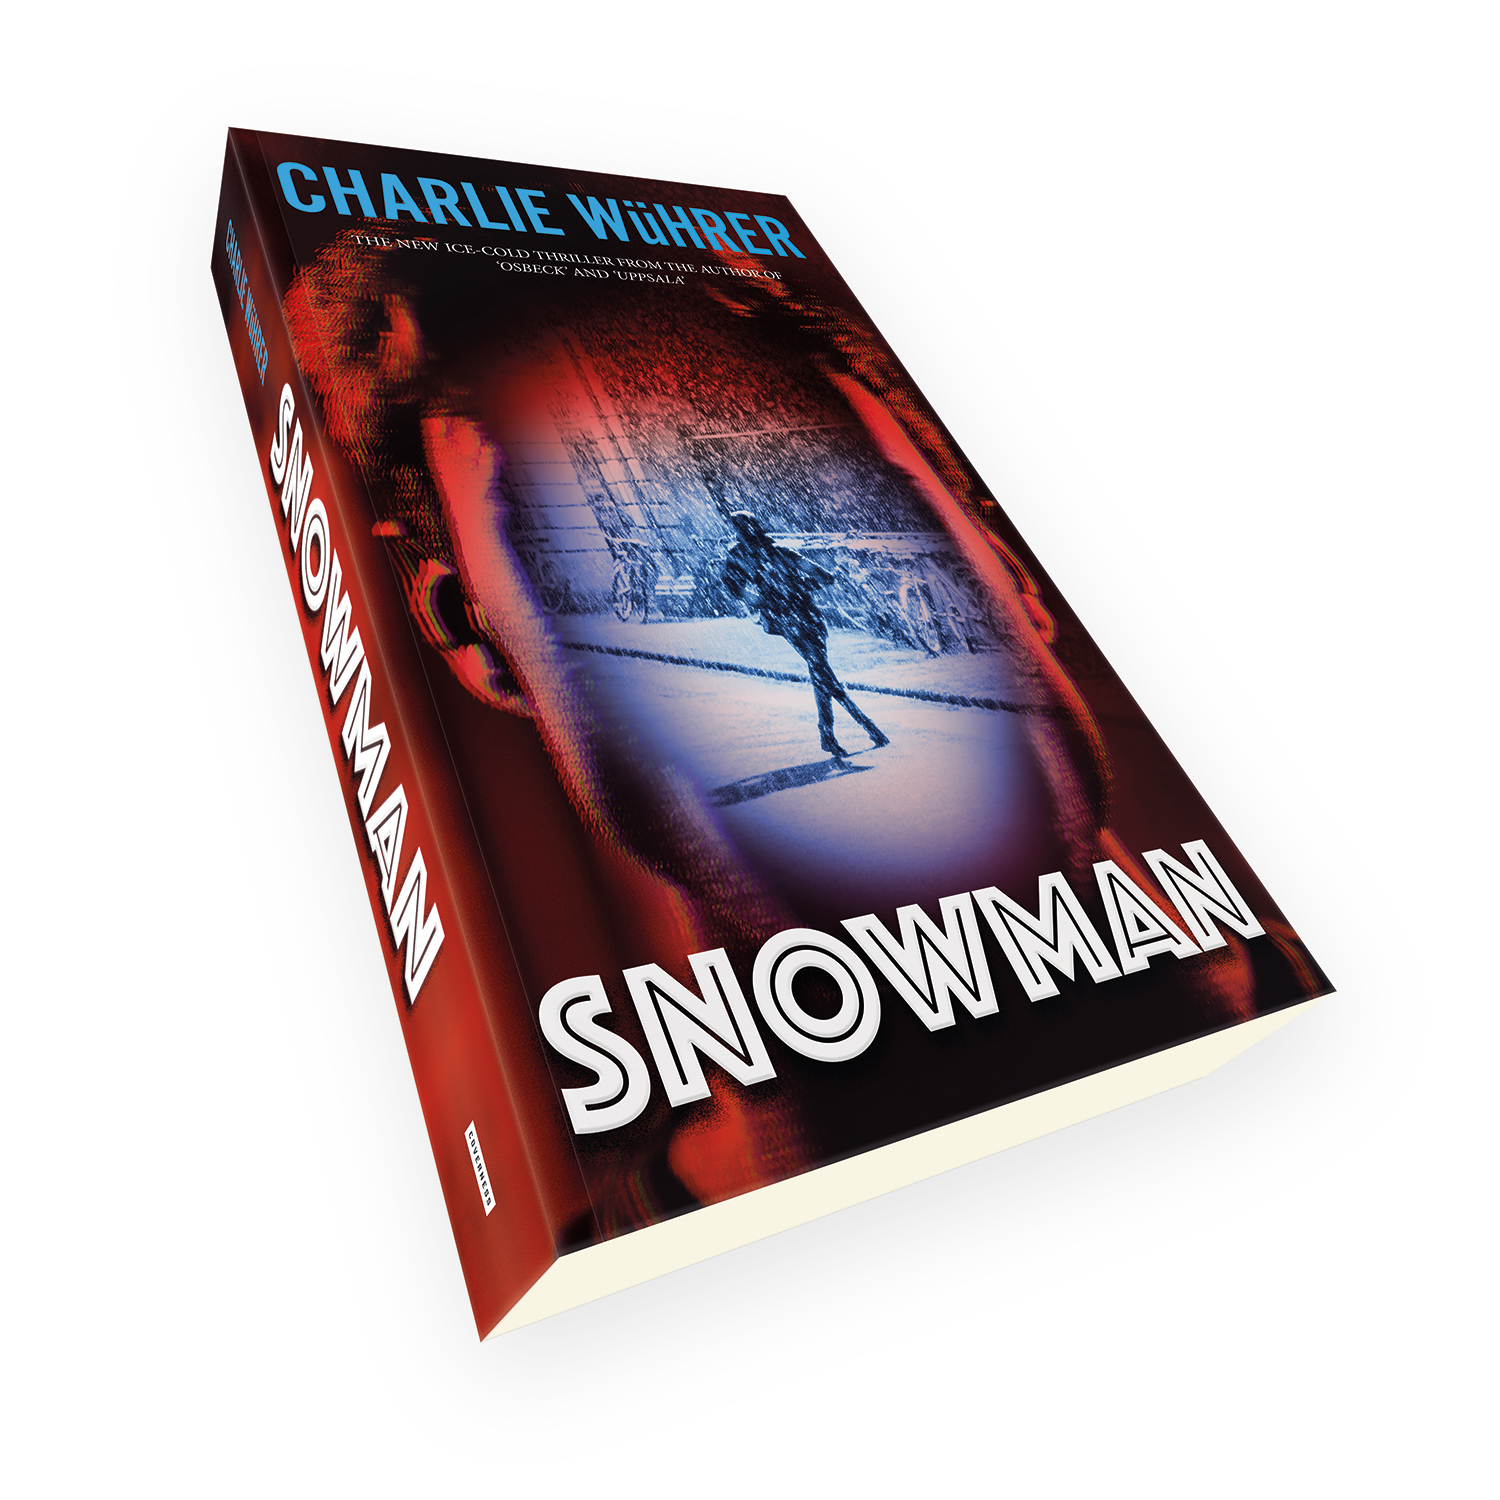 'Snowman' is a bespoke cover design for a modern thriller novel. The book cover was designed by Mark Thomas, of coverness.com. To find out more about my book design services, please visit www.coverness.com.